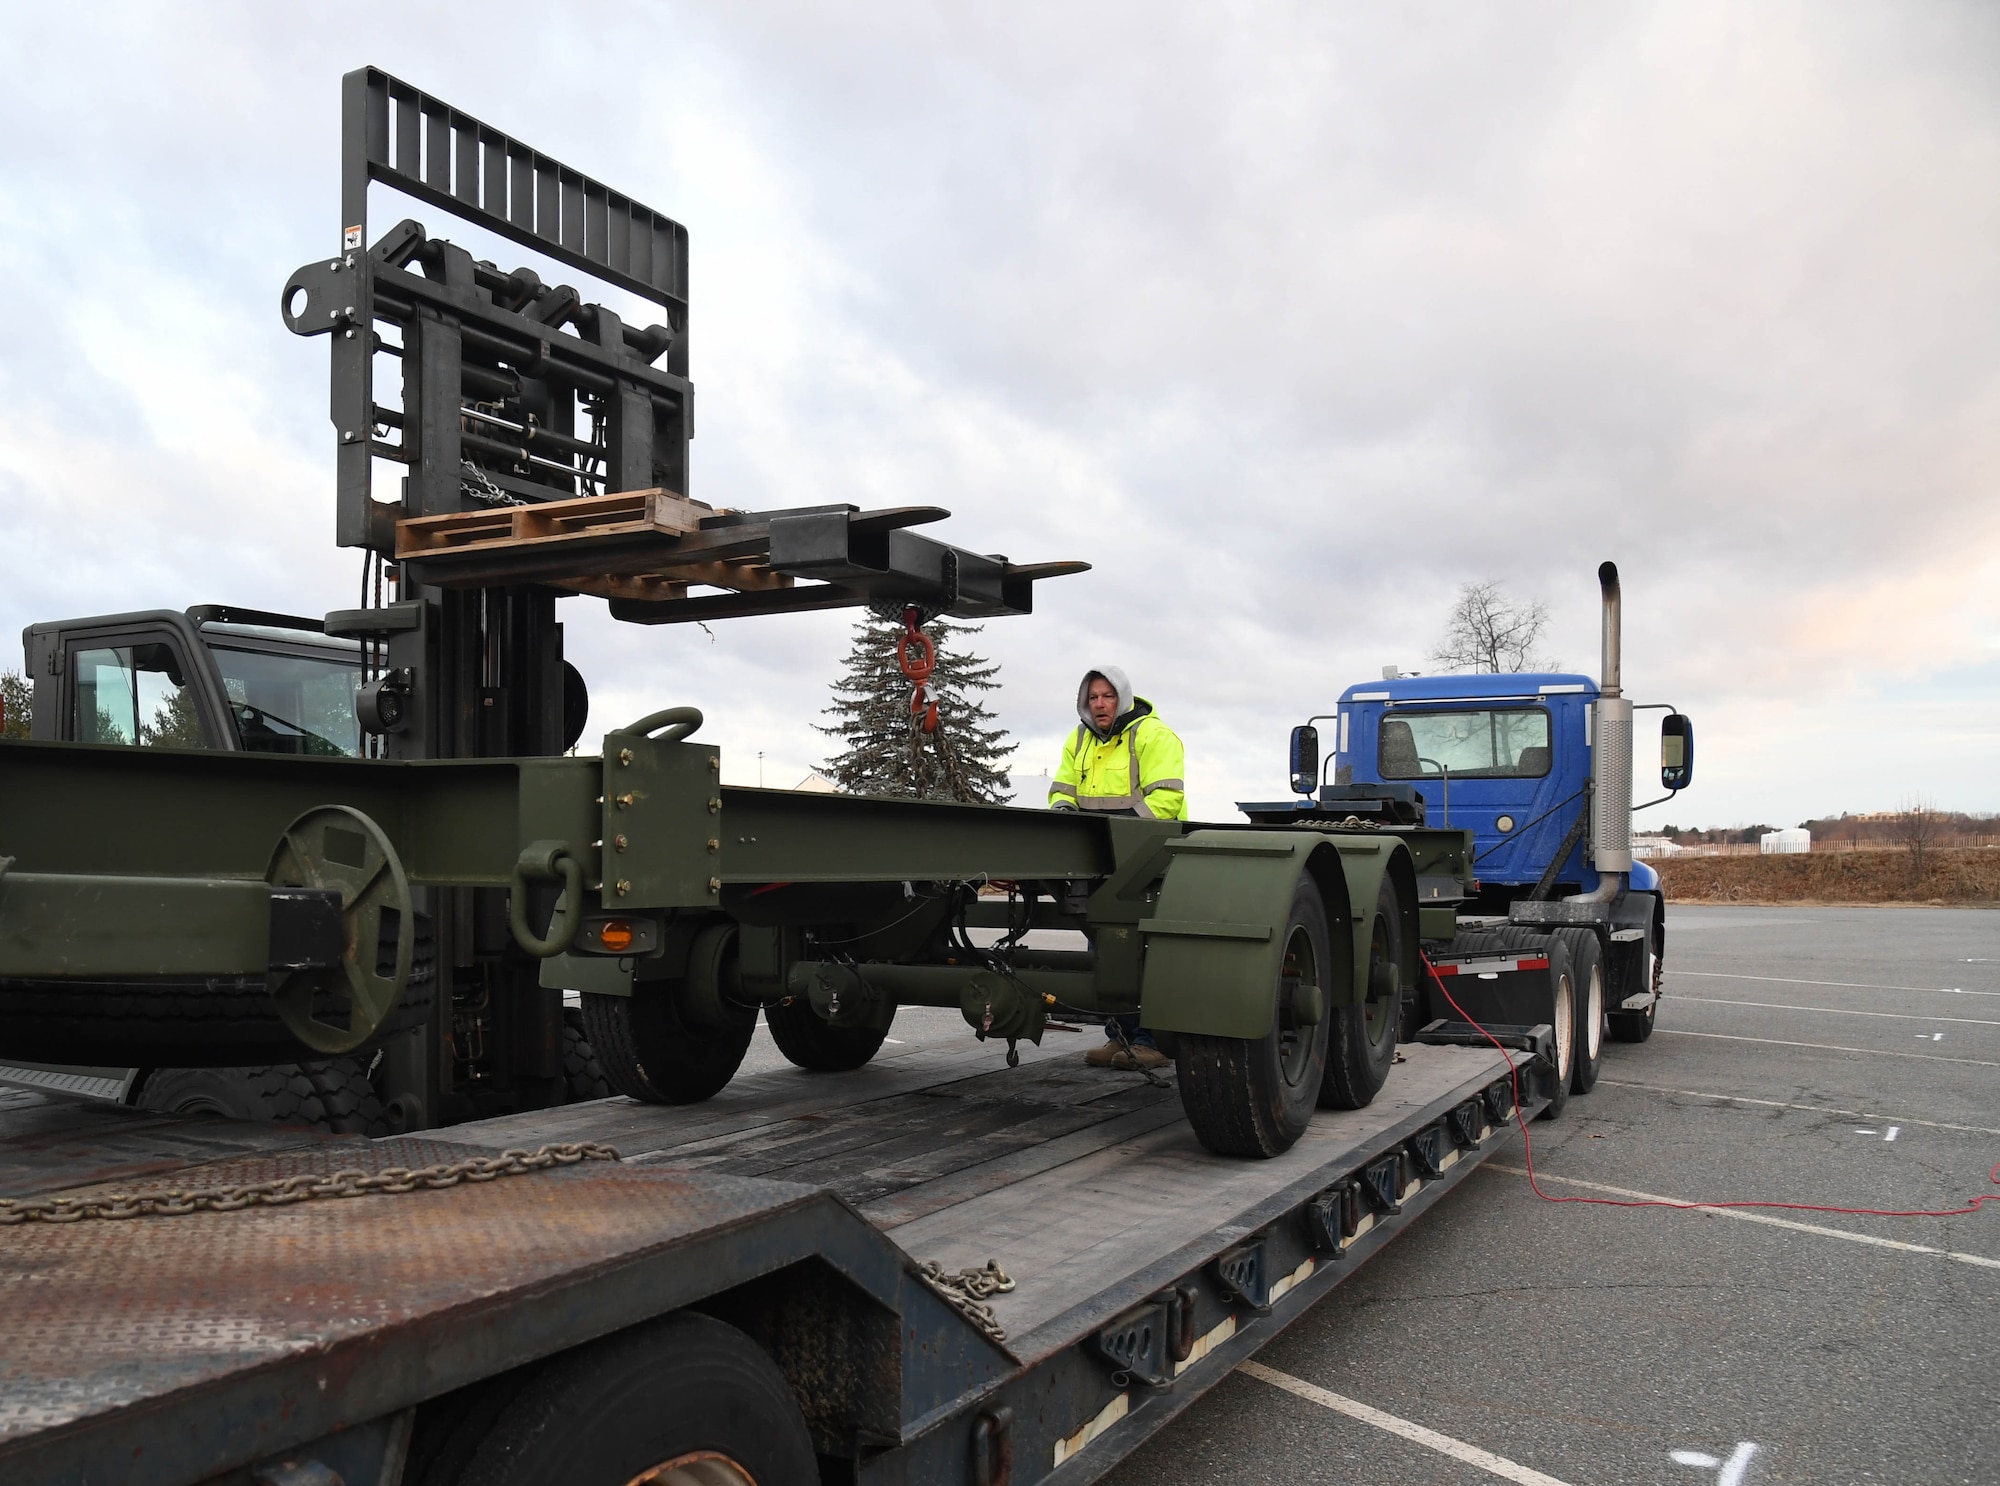 66th Air Base Group Logistics Readiness Squadron employees coordinate the unloading of a testing trailer Jan. 10, 2019, at Hanscom Air Force Base, Mass. Program Executive Office Digital purchased the trailer to test loading and delivery characteristics for the Three Dimensional Expeditionary Long Range Radar, or 3DELRR. (U.S. Air Force photo by Linda LaBonte Britt)